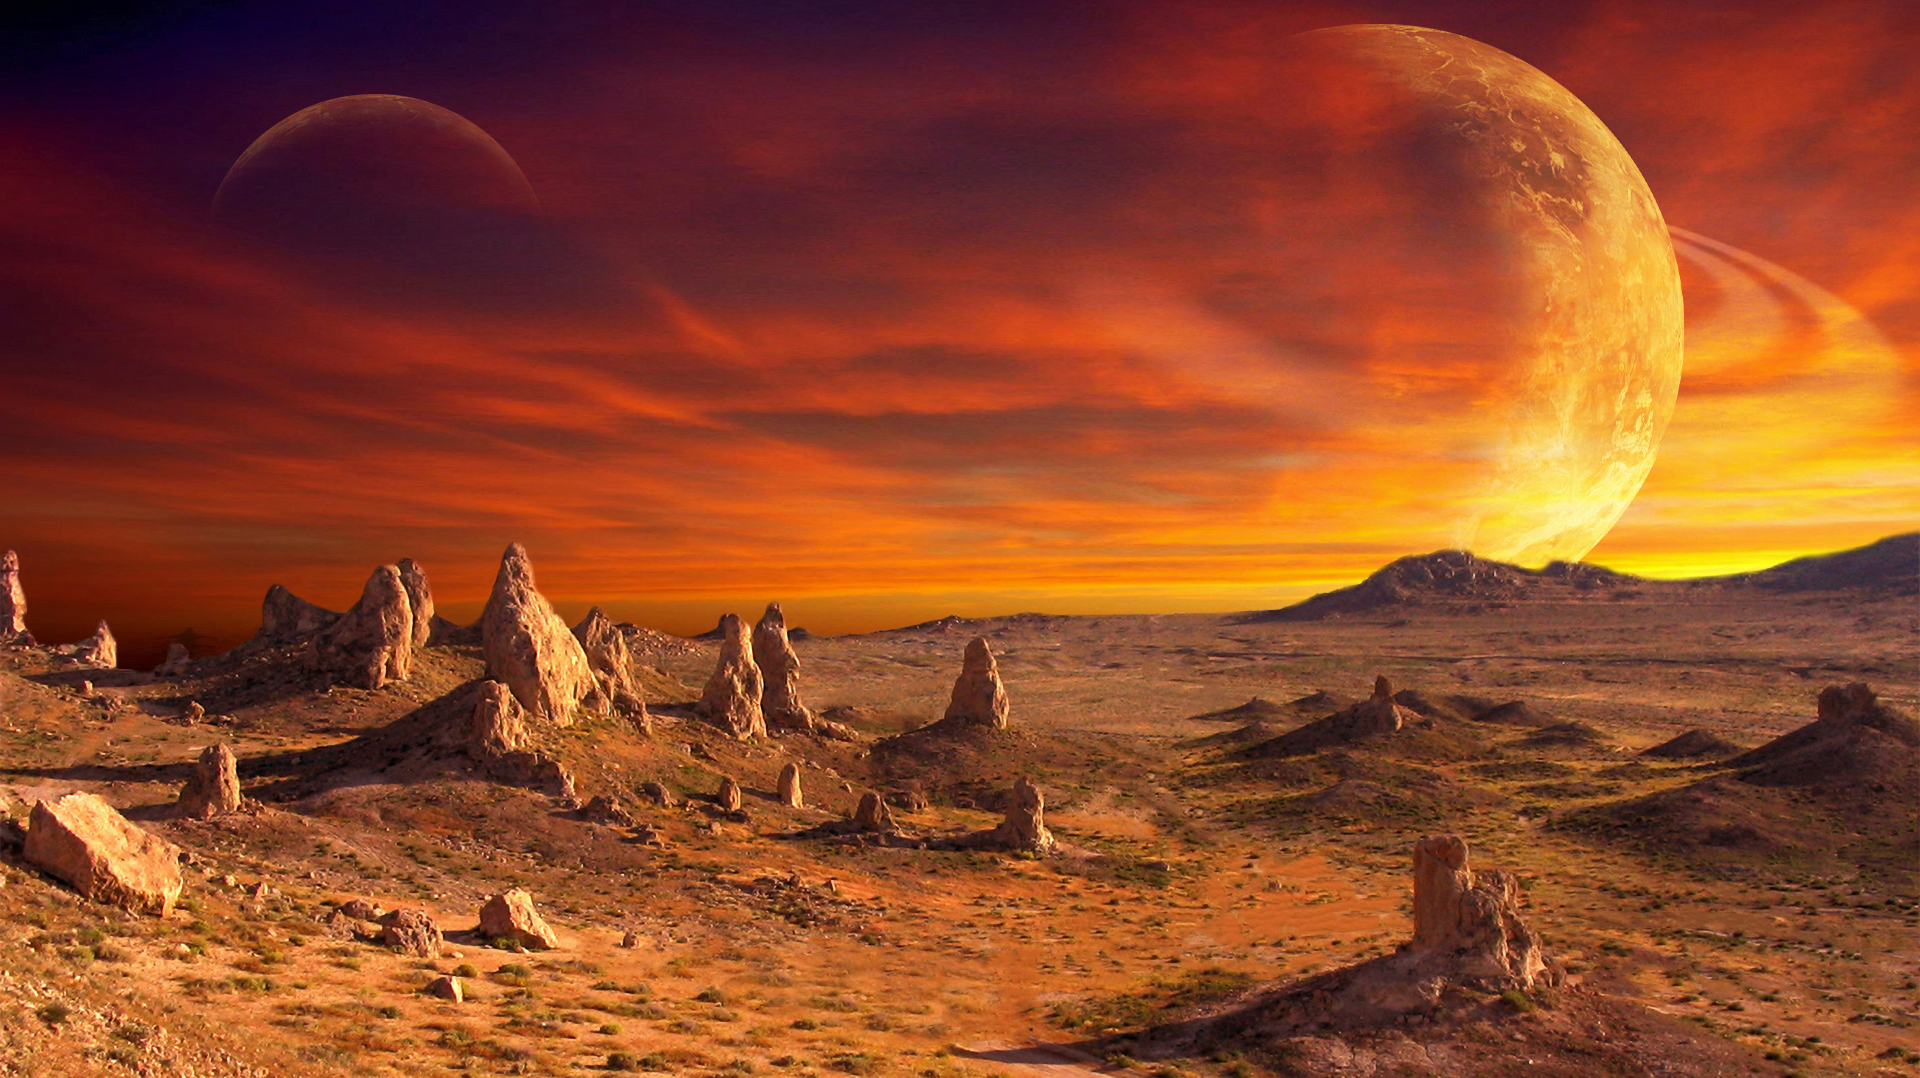 Cinematic Mars Landscape view from the land hd 4k image